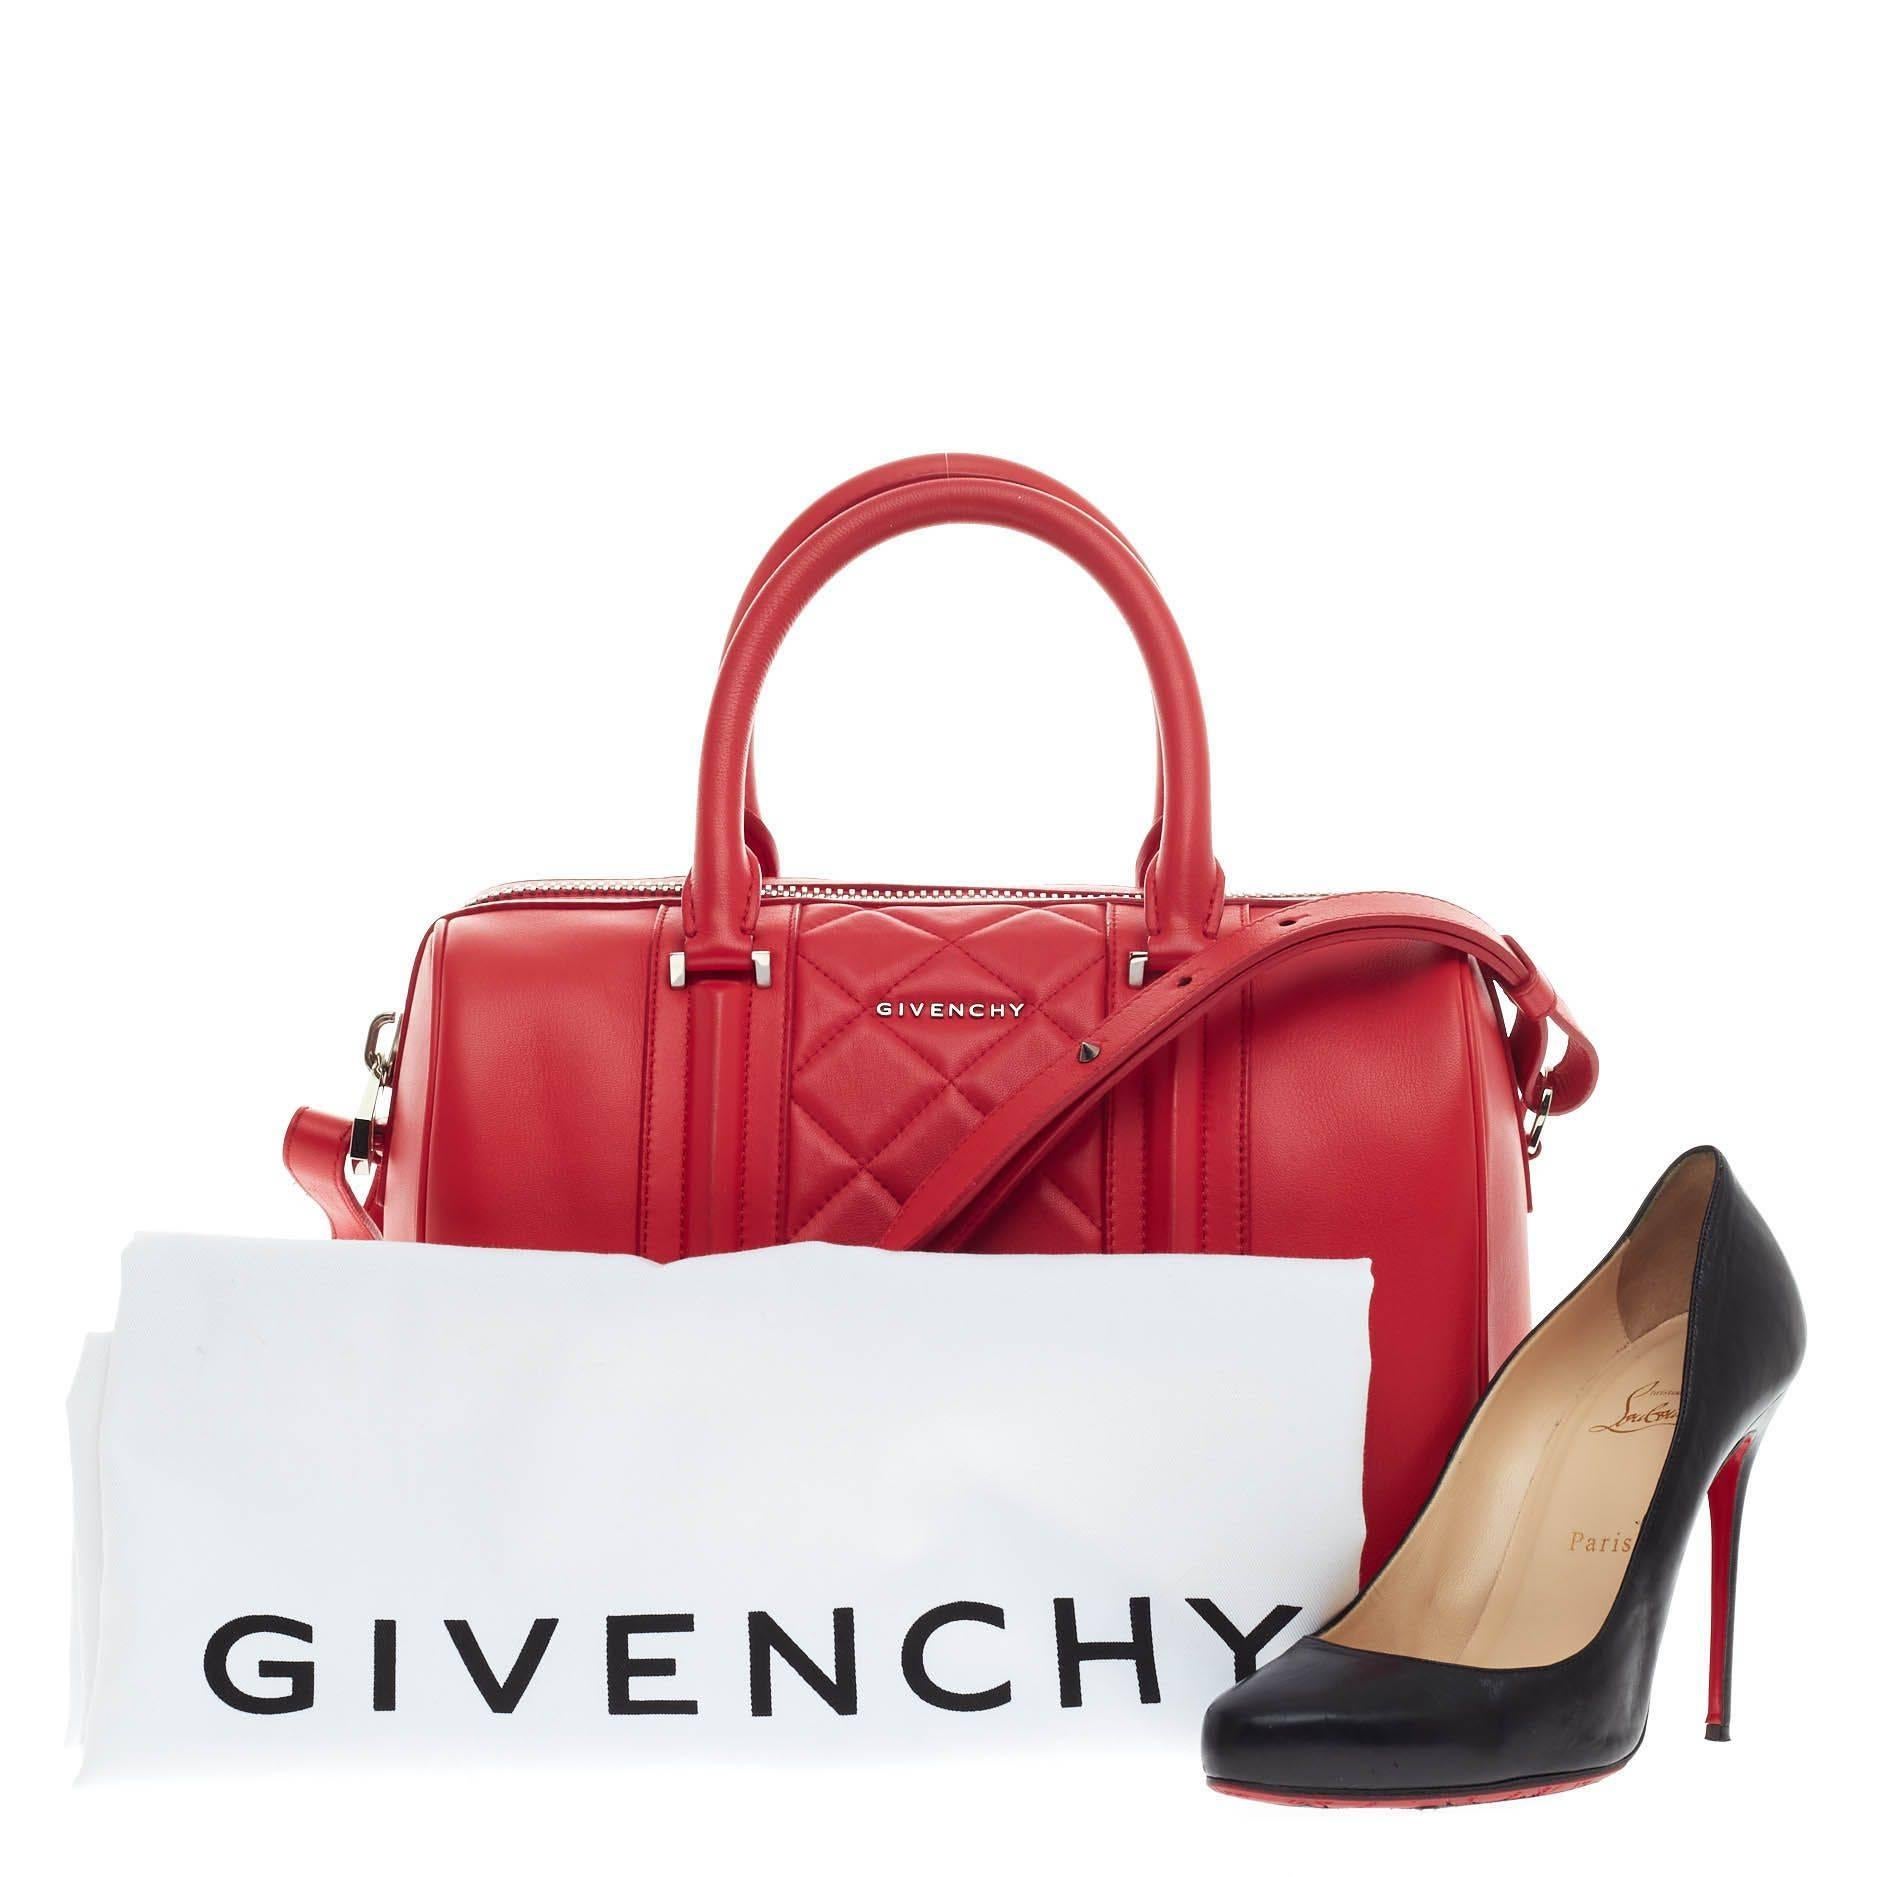 This authentic Givenchy Lucrezia Duffle Bag Quilted Leather Medium is one of the season's hottest bags perfect for the modern woman. Crafted from bright red orange quilted leather, this structured minimalist bowler bag features quilted diamond